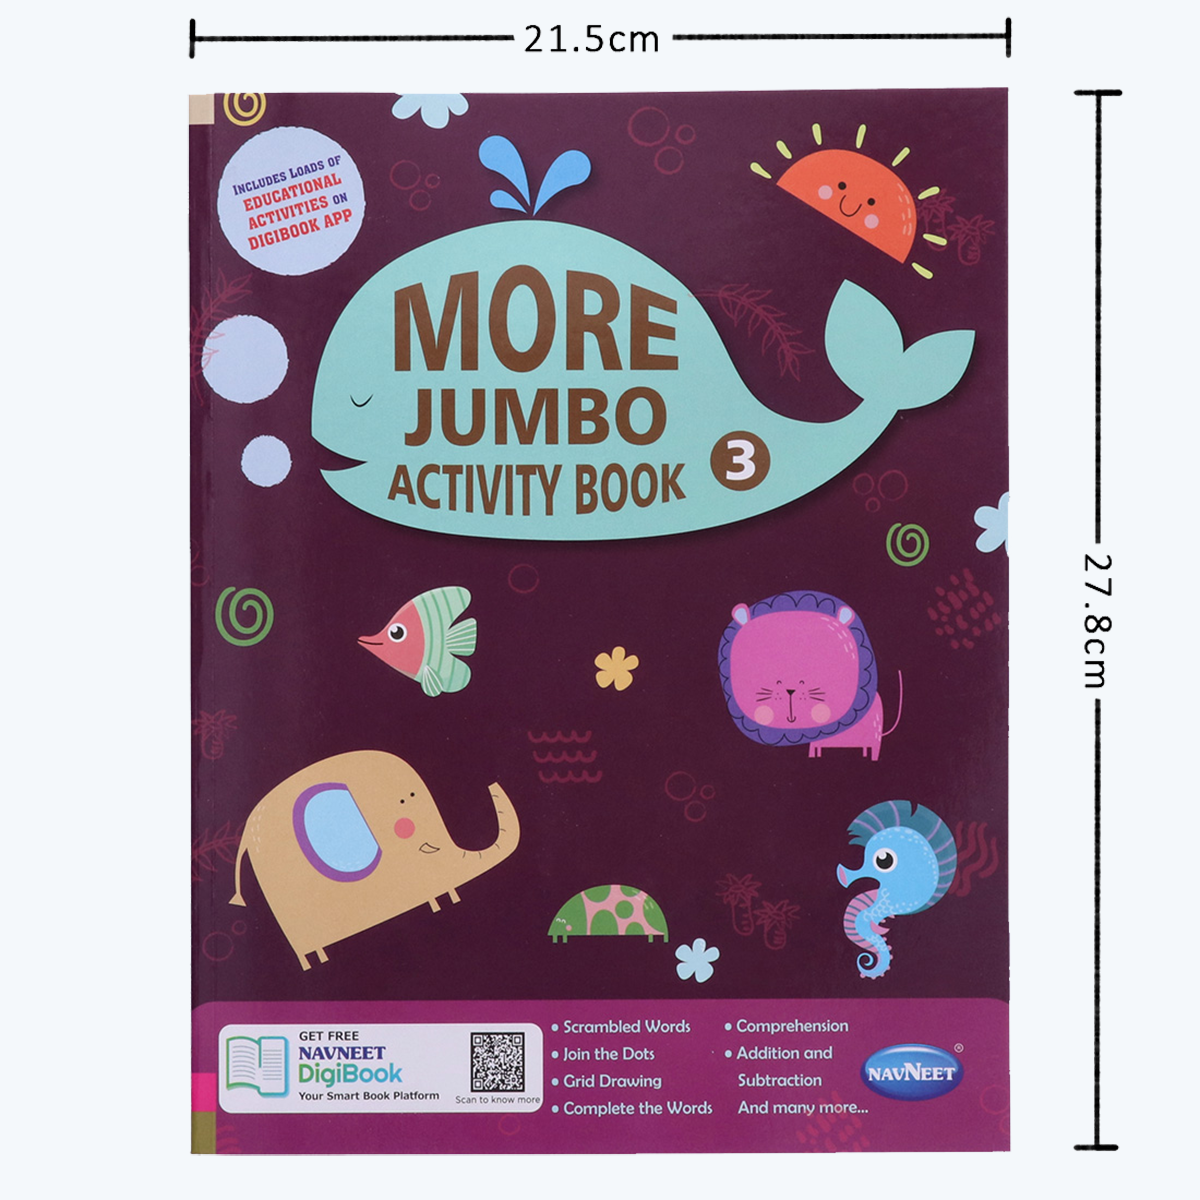 Navneet More Jumbo Activity Book 3- Fun Activities for Kids- Scrambled Words, join the dots, Grid Drawing, Complete the Words, Comprehension, Addition & Subtraction